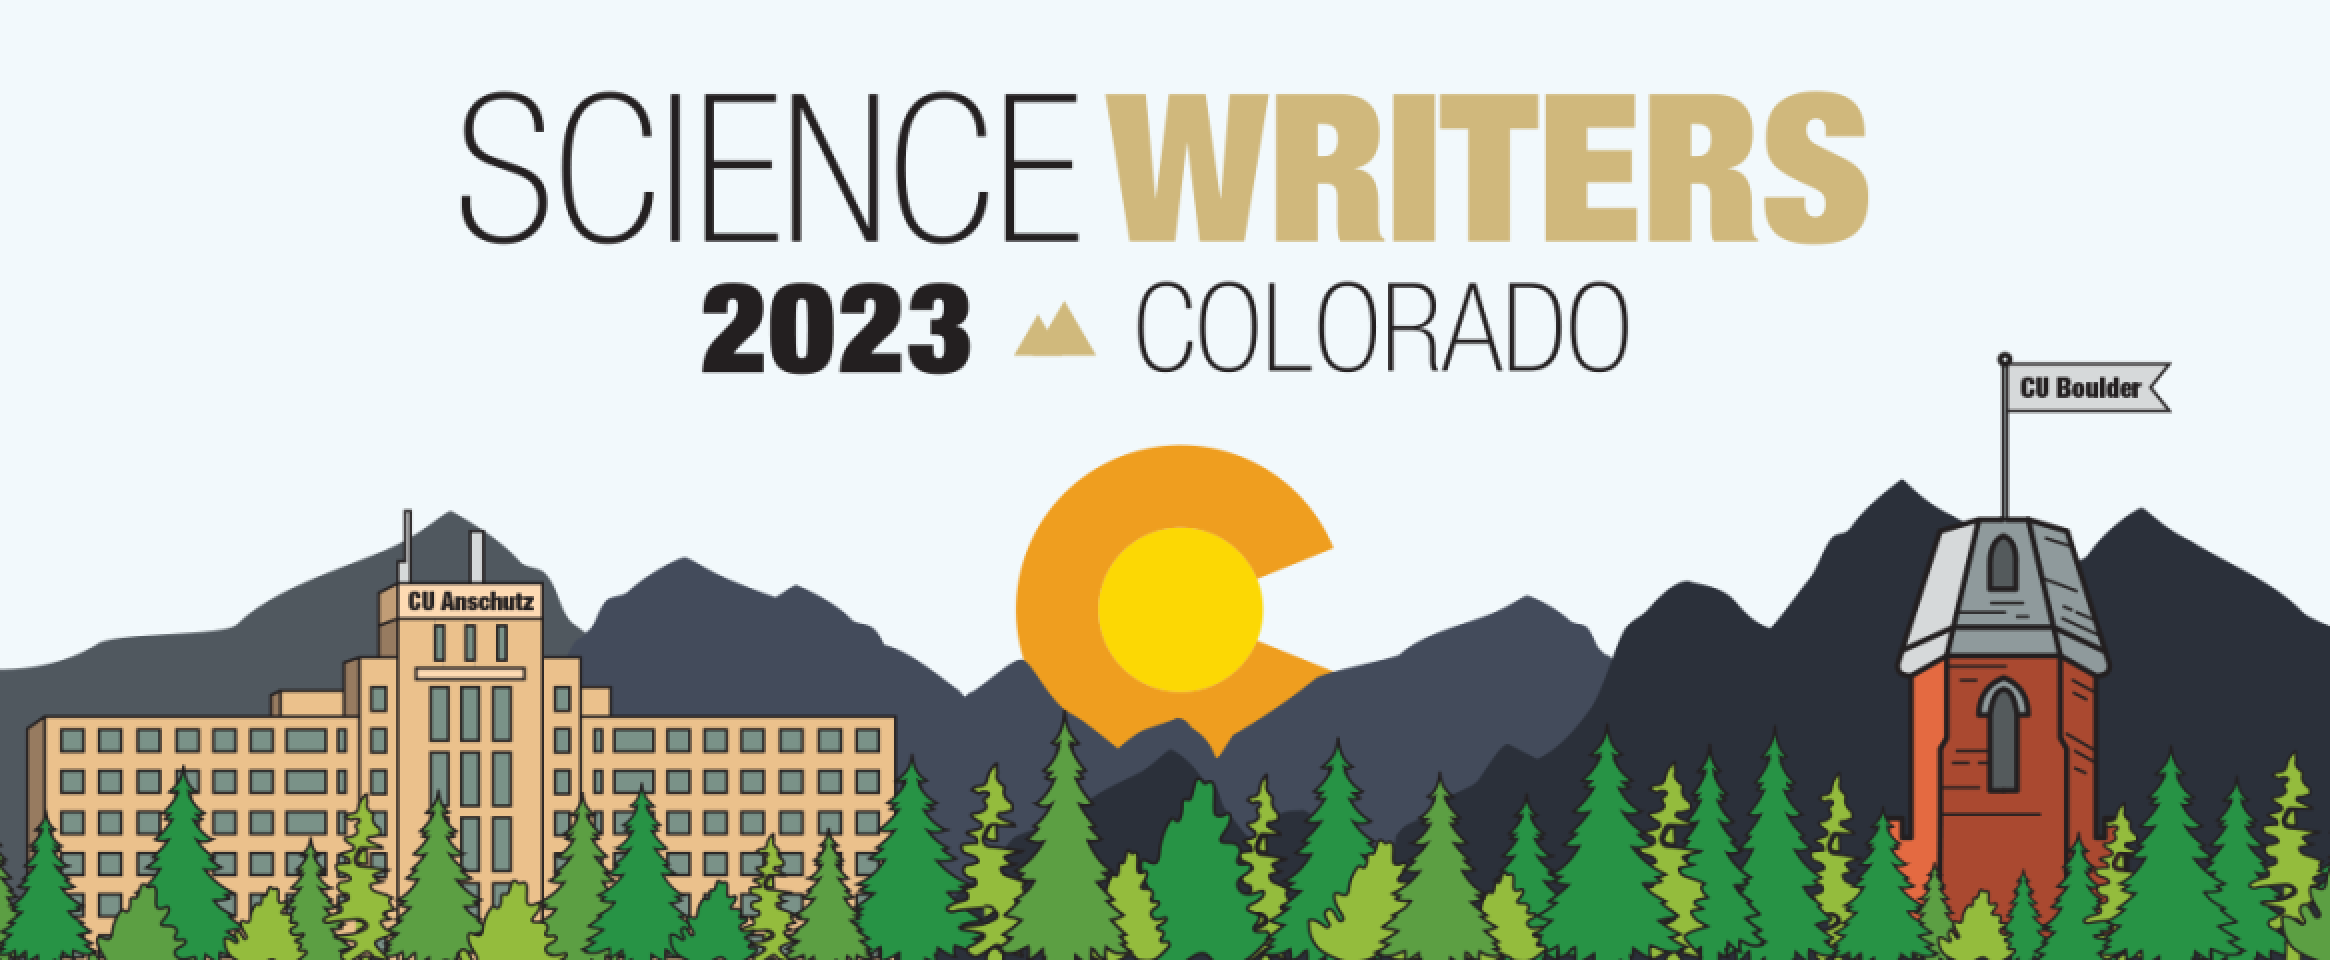 Sci Wri 23 graphic with illustration of the Colorado mountains and conifer forest skyline with cartoons of the CU Anschutz medical building and the CU Boulder Old Main tower, along with the Colorado State flag "golden sun" letter C. Title reads Science Writers 2023 Colorado